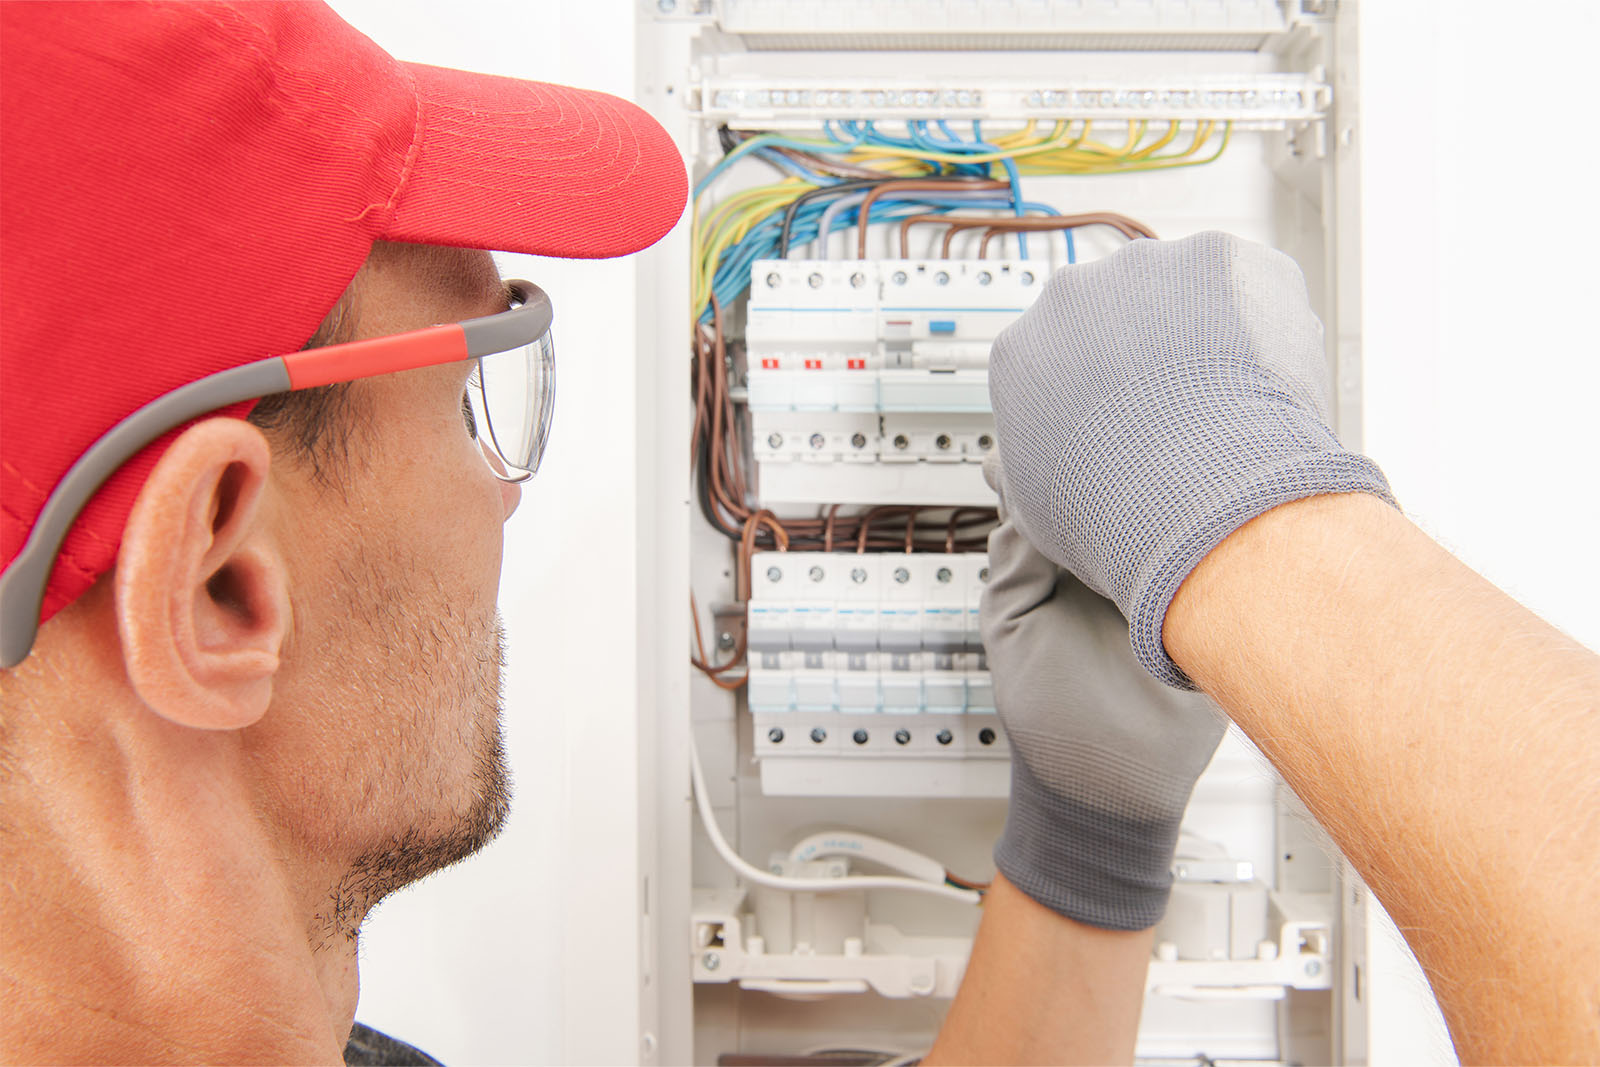 Importance of Proper Earthing in Electrical Systems